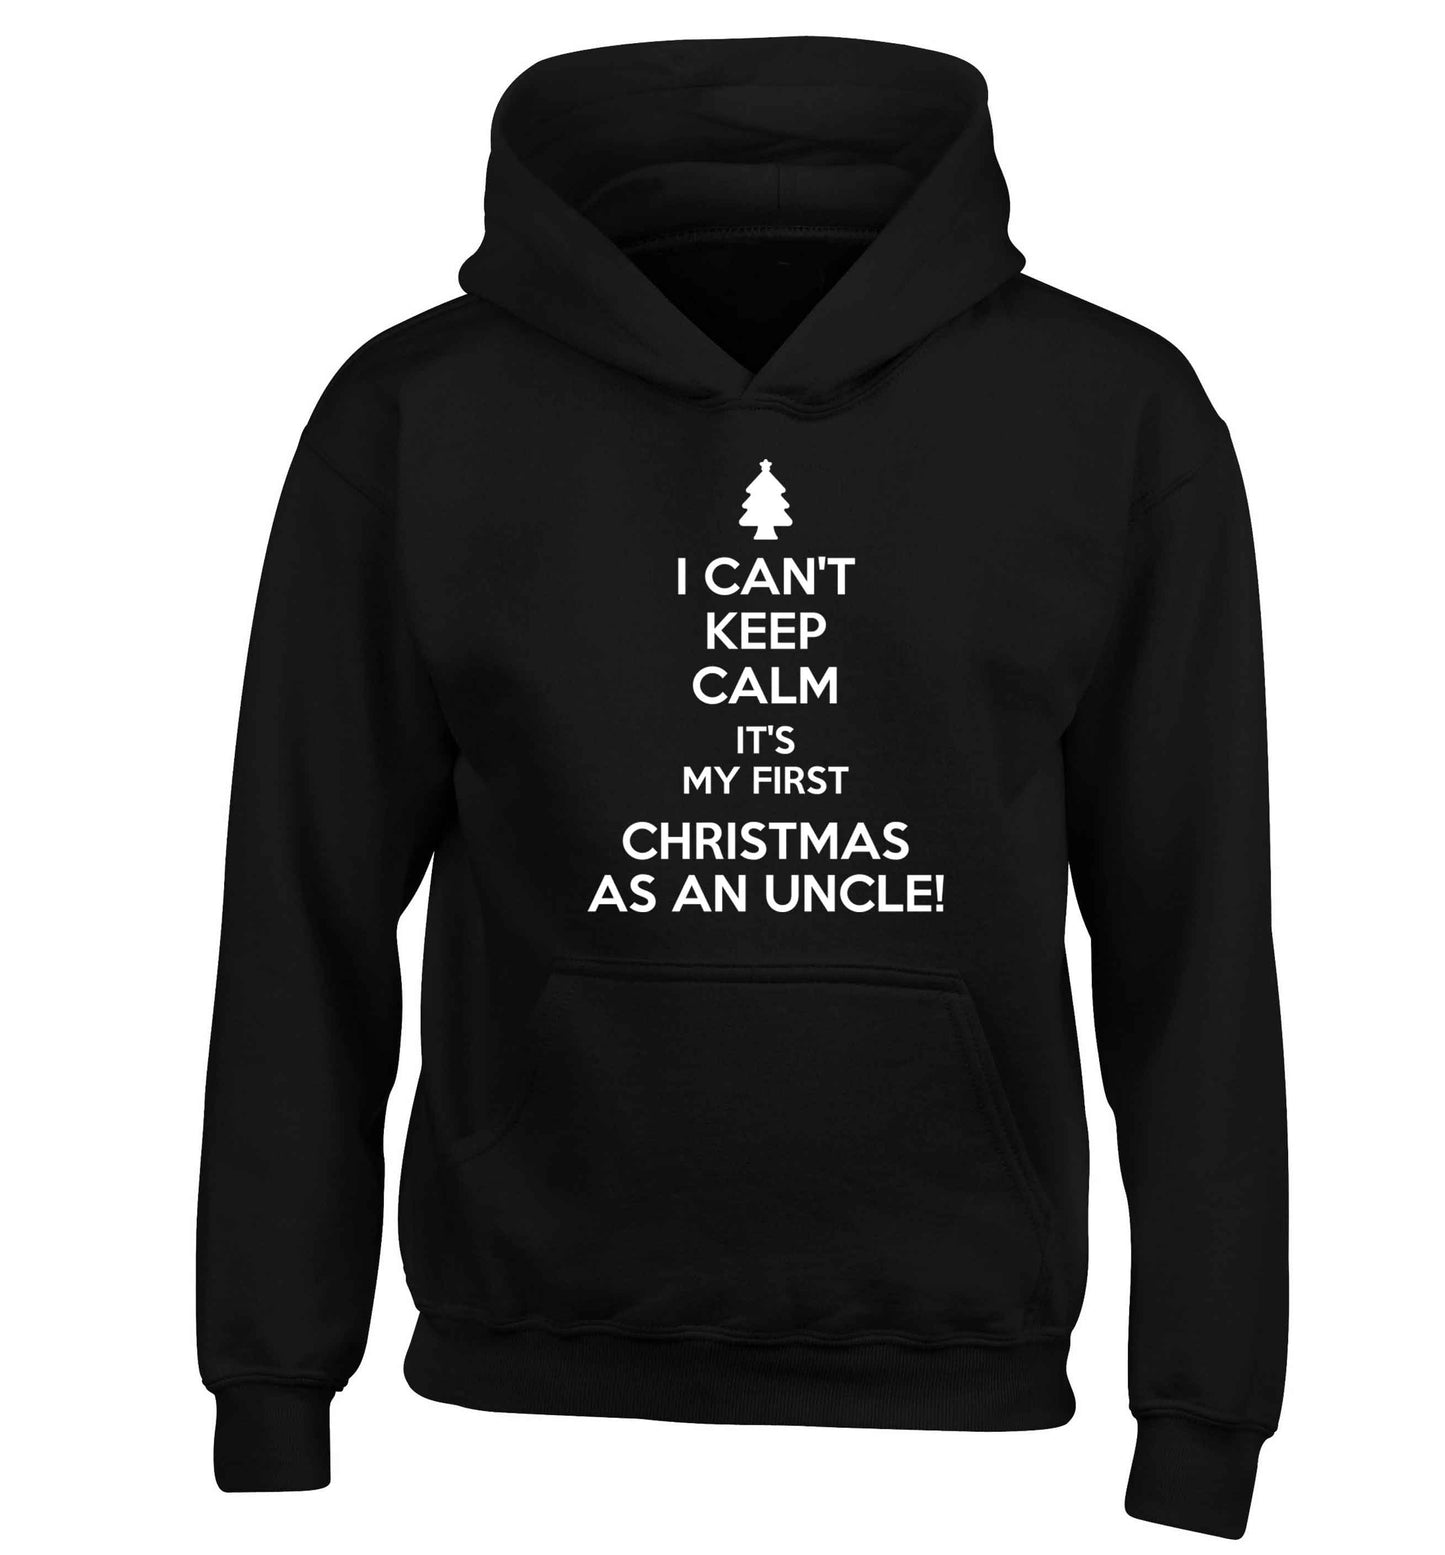 I can't keep calm it's my first Christmas as an uncle! children's black hoodie 12-13 Years